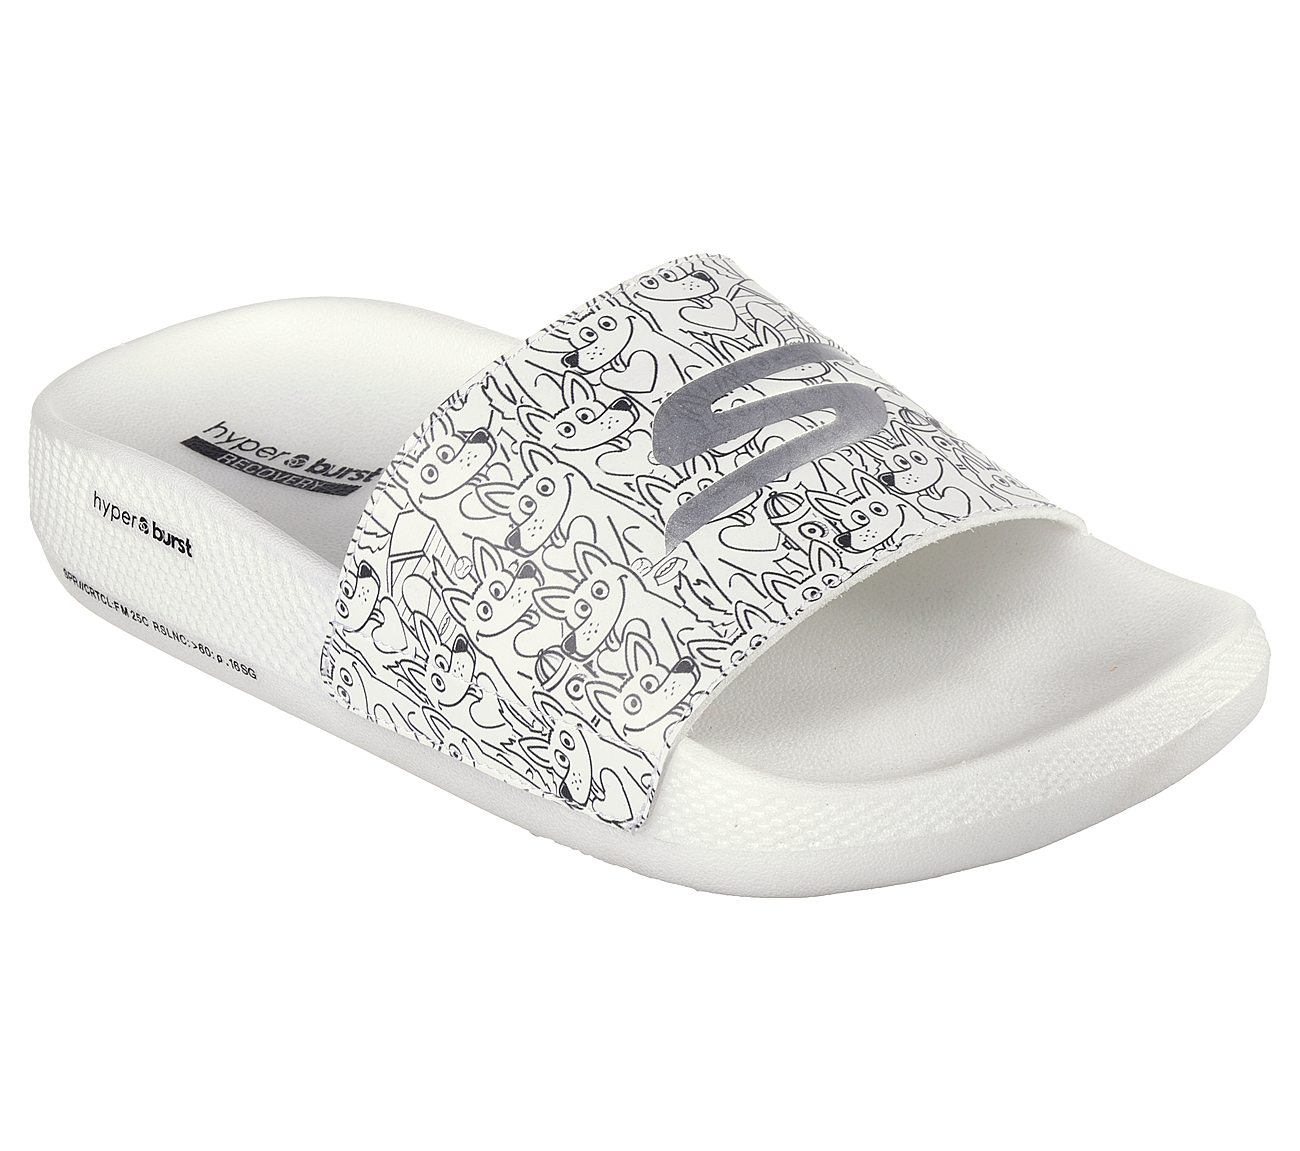 HYPER SLIDE - PUPPY LOVE, WHITE BLACK Footwear Lateral View